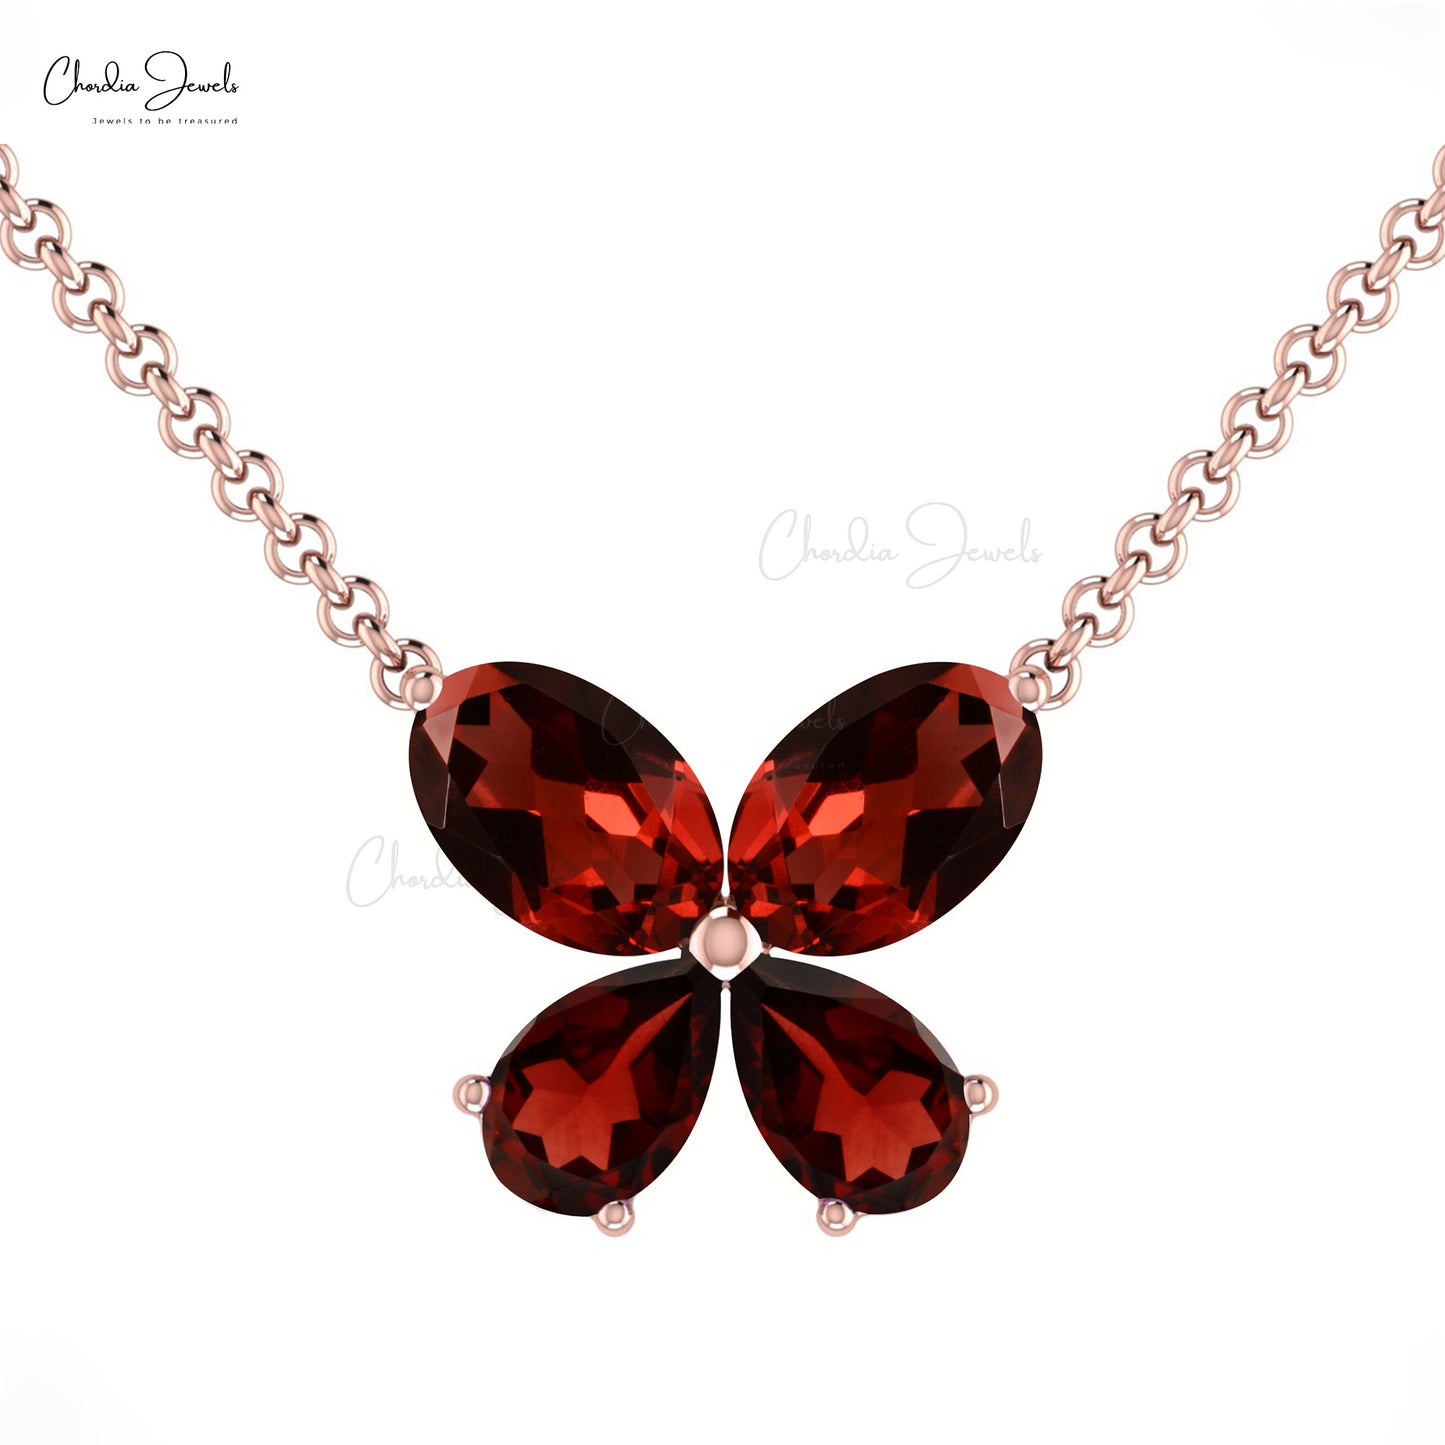 Customized Elegant Natural Garnet Butterfly Necklace Pendant Oval Shape 4-Stone Necklace in 14k Solid Gold Valentine Day Gift For Love Ones